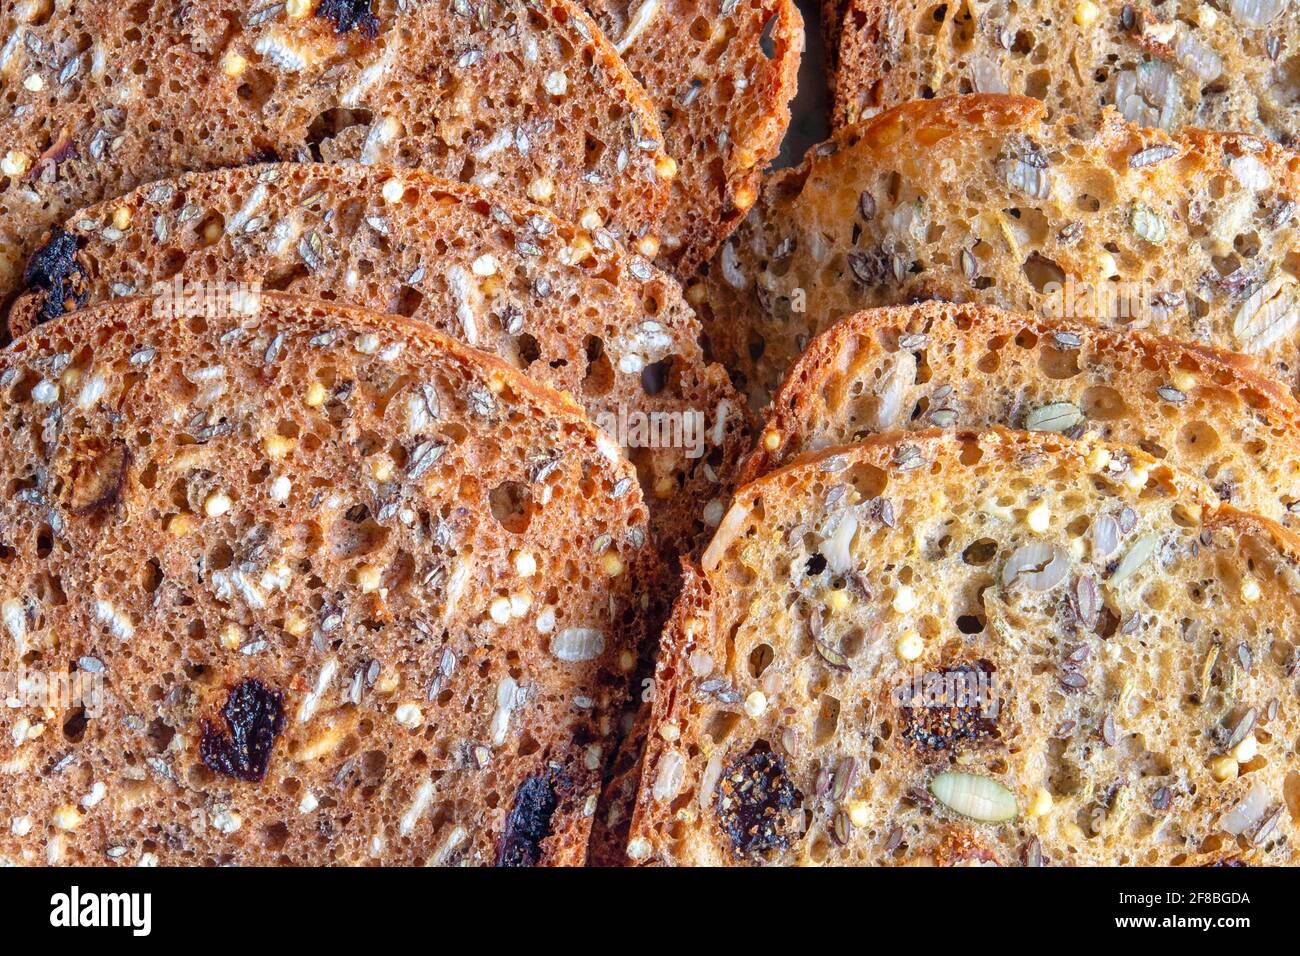 Slices of bread with seeds Stock Photo